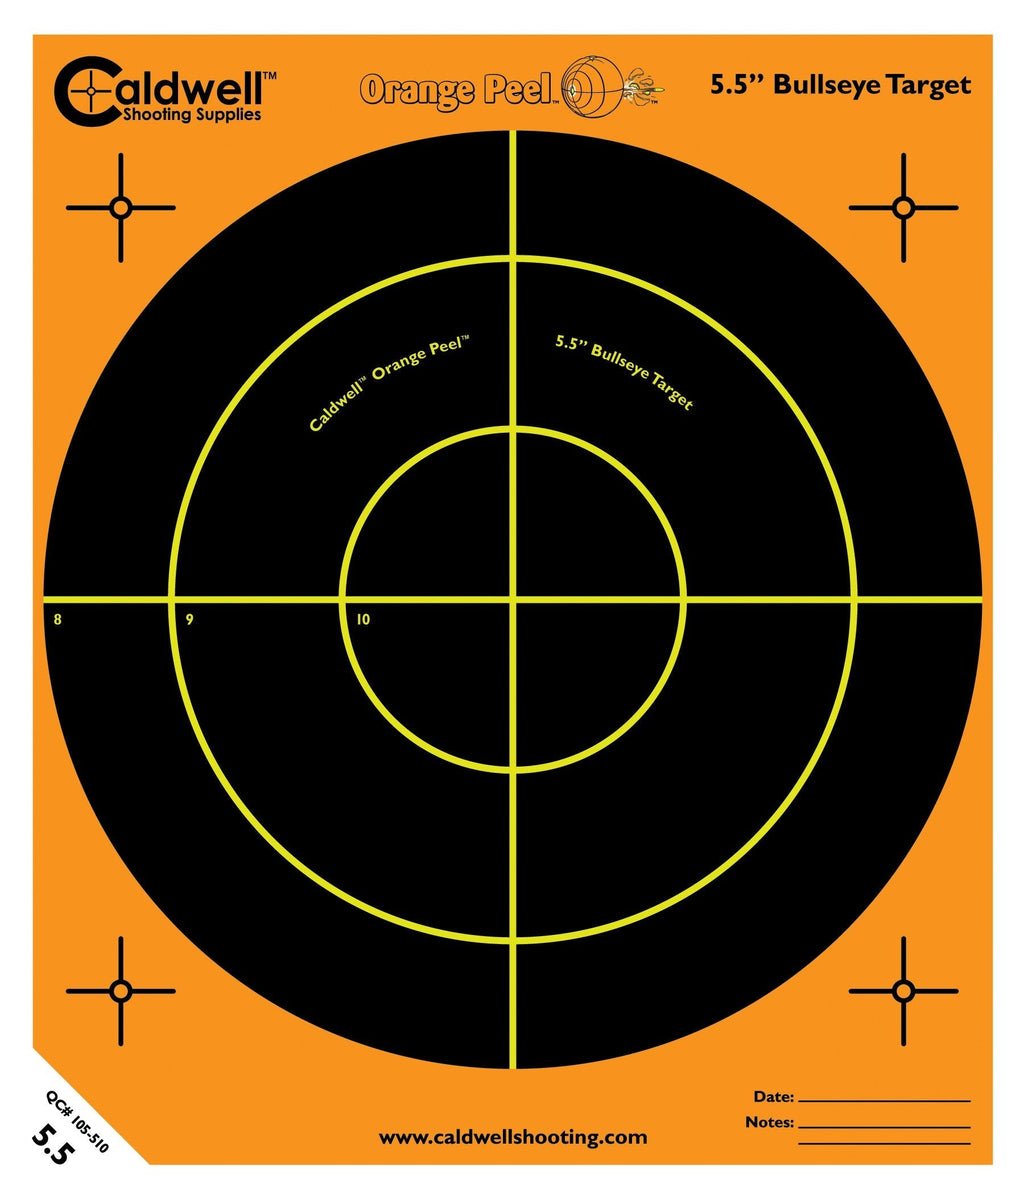 Caldwell Orange Peel Bullseye Targets with Flake Off Material, Strong Adhesive and Multiple Sizes for Outdoor, Range, Shooting and Hunting 8" Bullseye: 10 sheets - BeesActive Australia